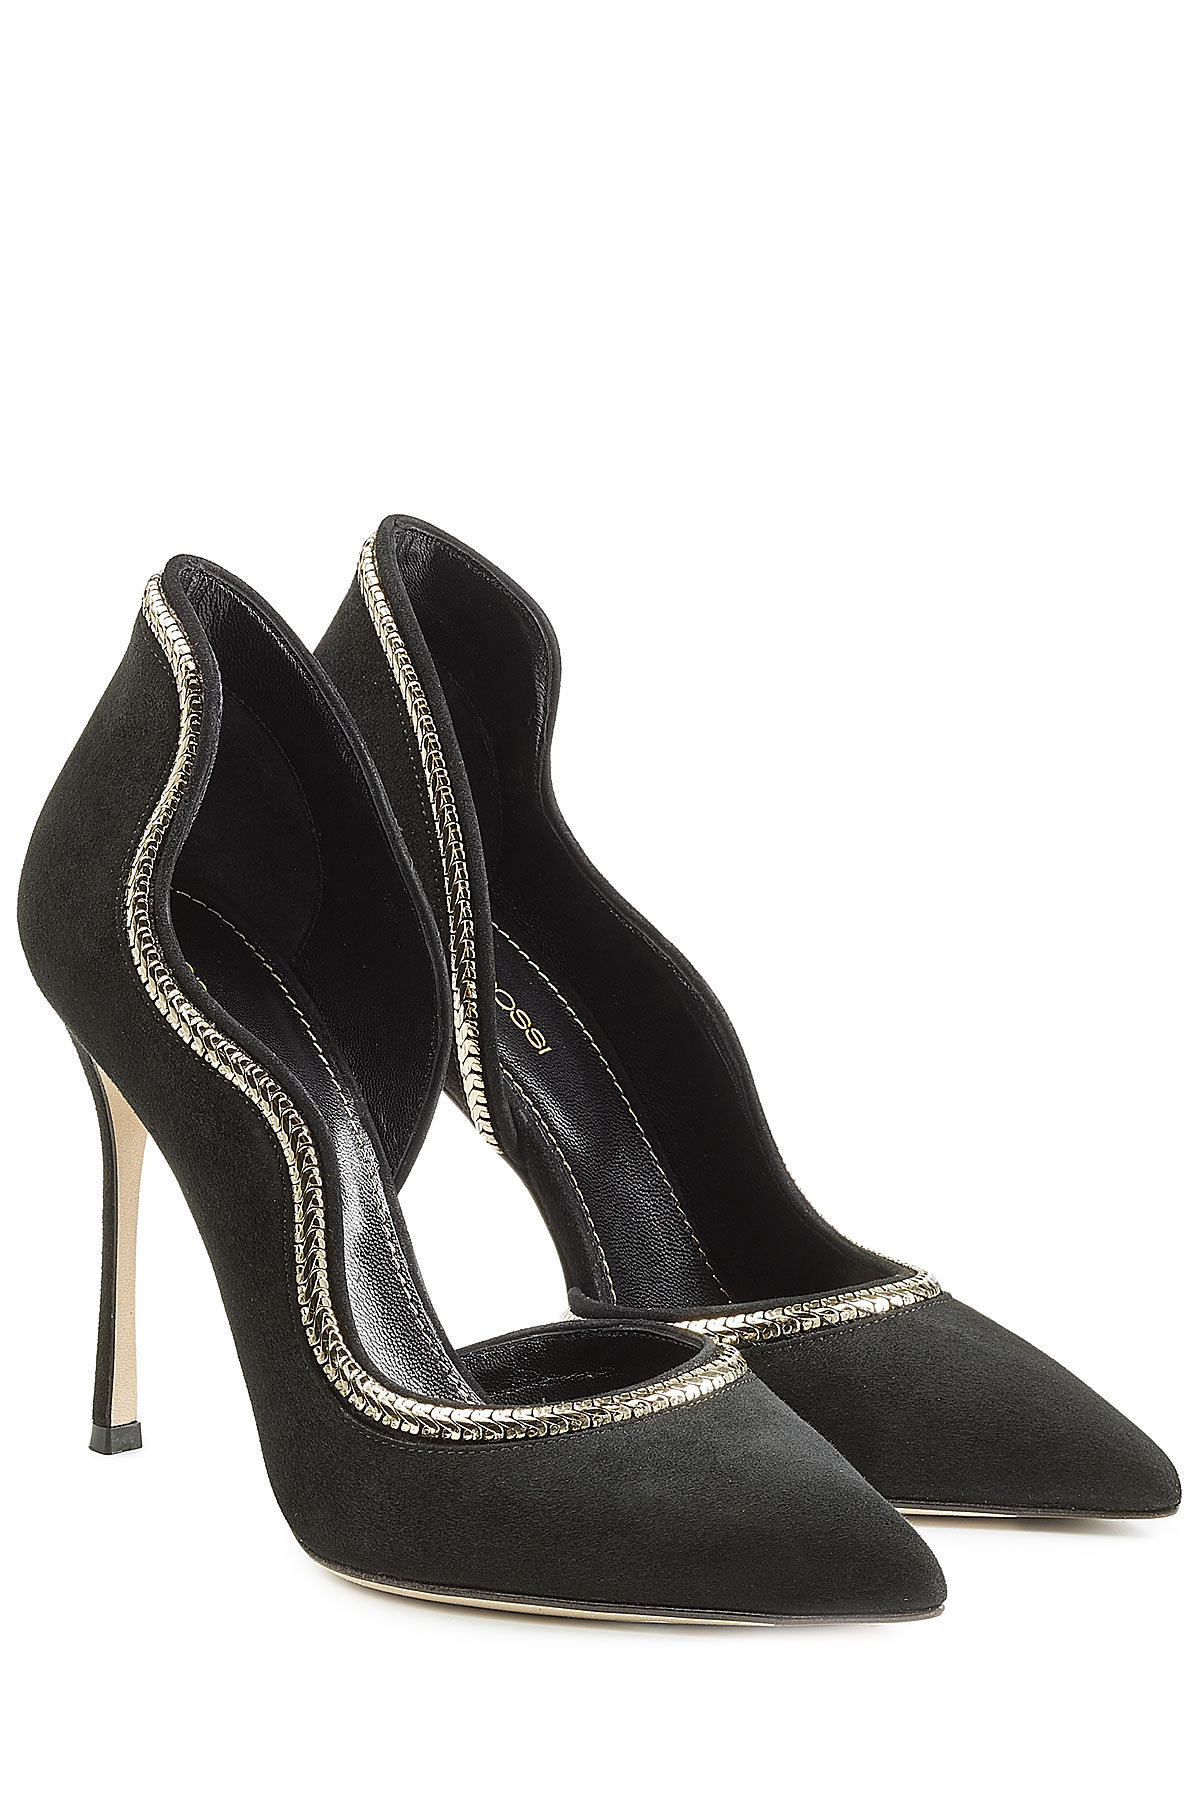 Sergio Rossi - Suede Pumps with Chain Embellishment